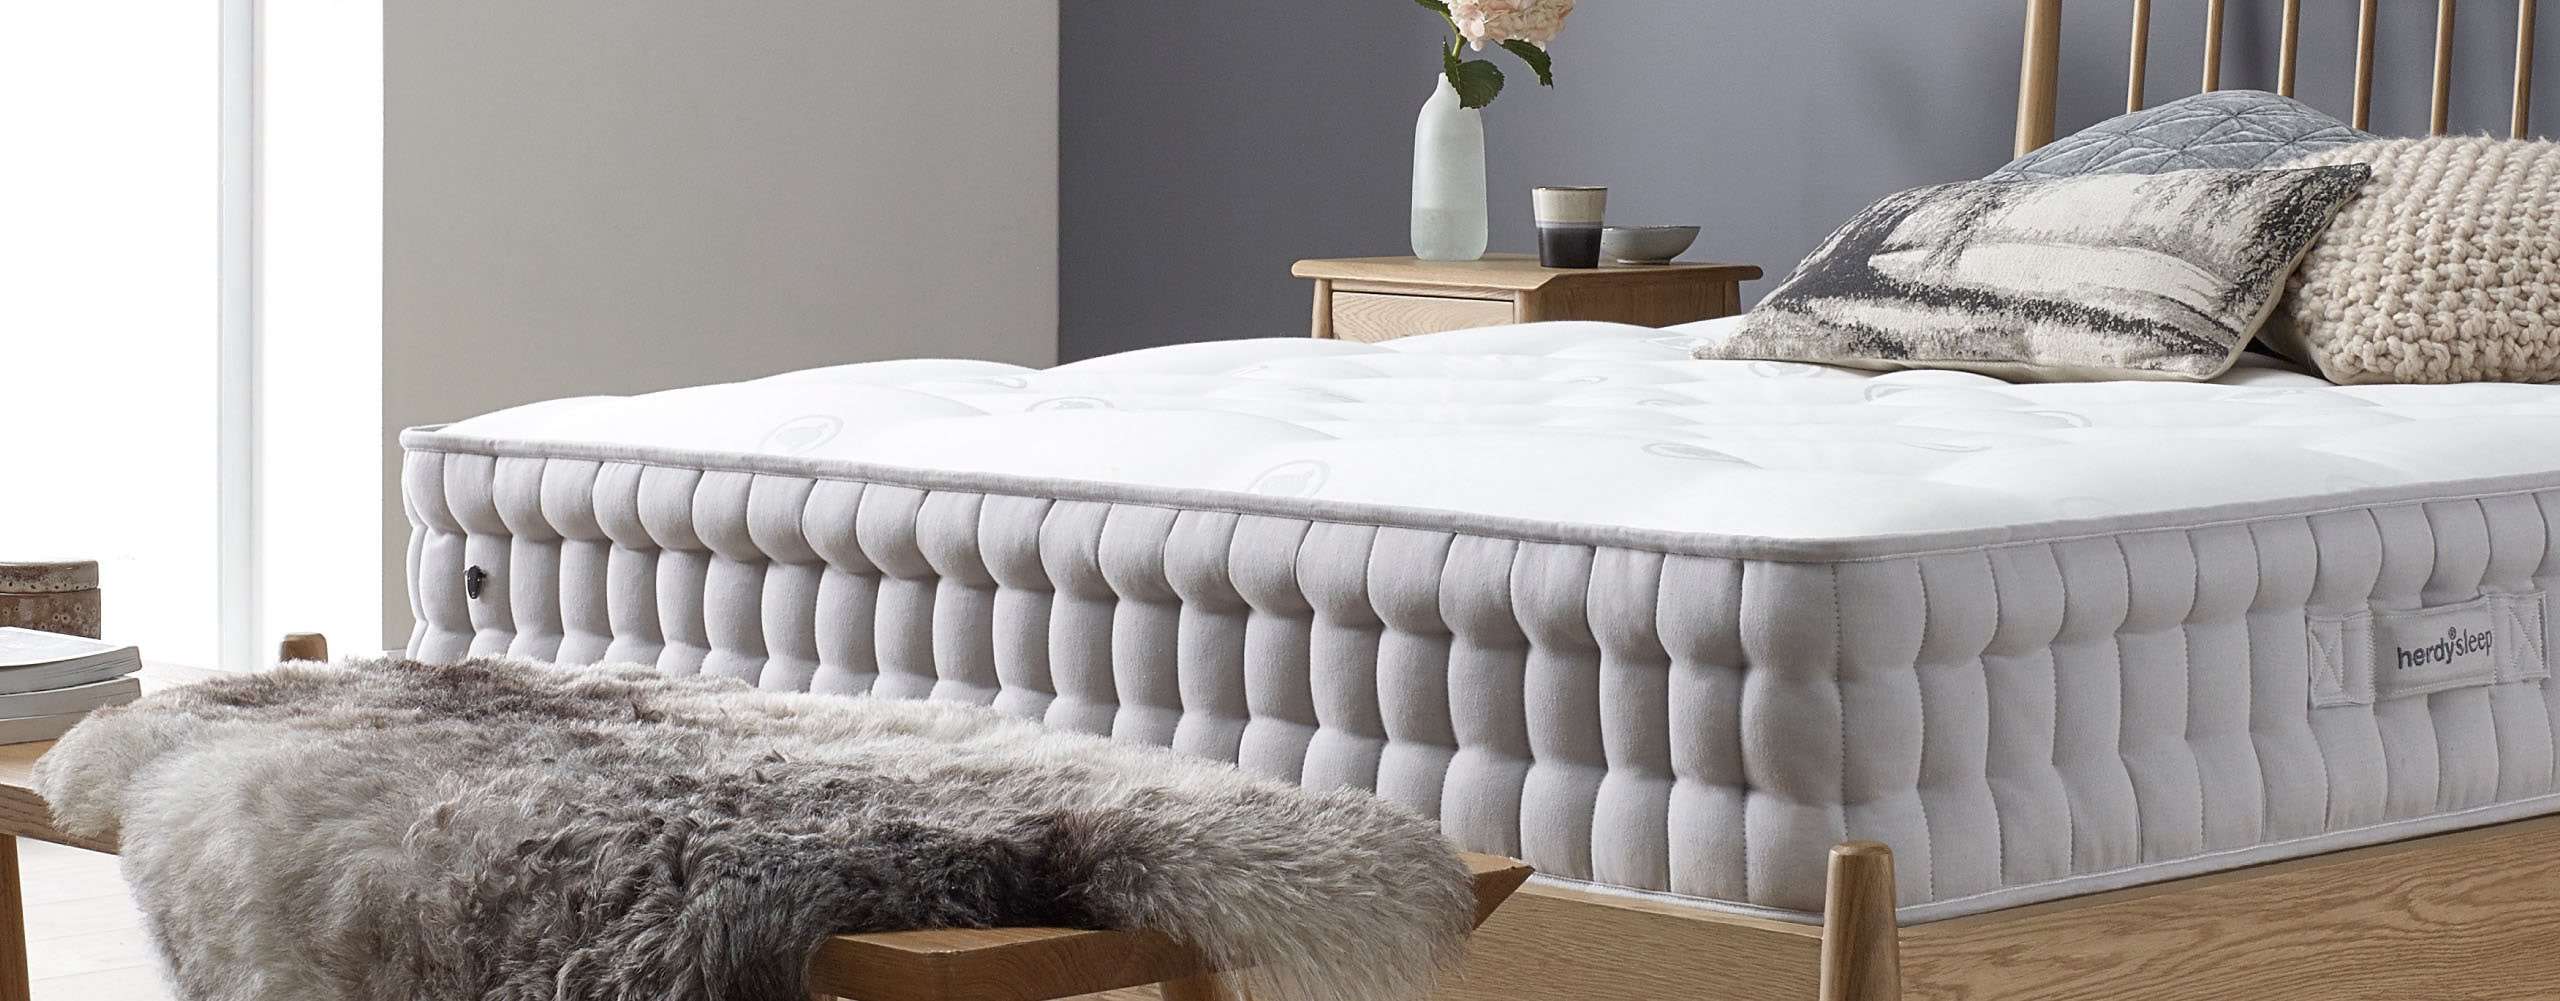 How do you choose a comfortable king size mattress?